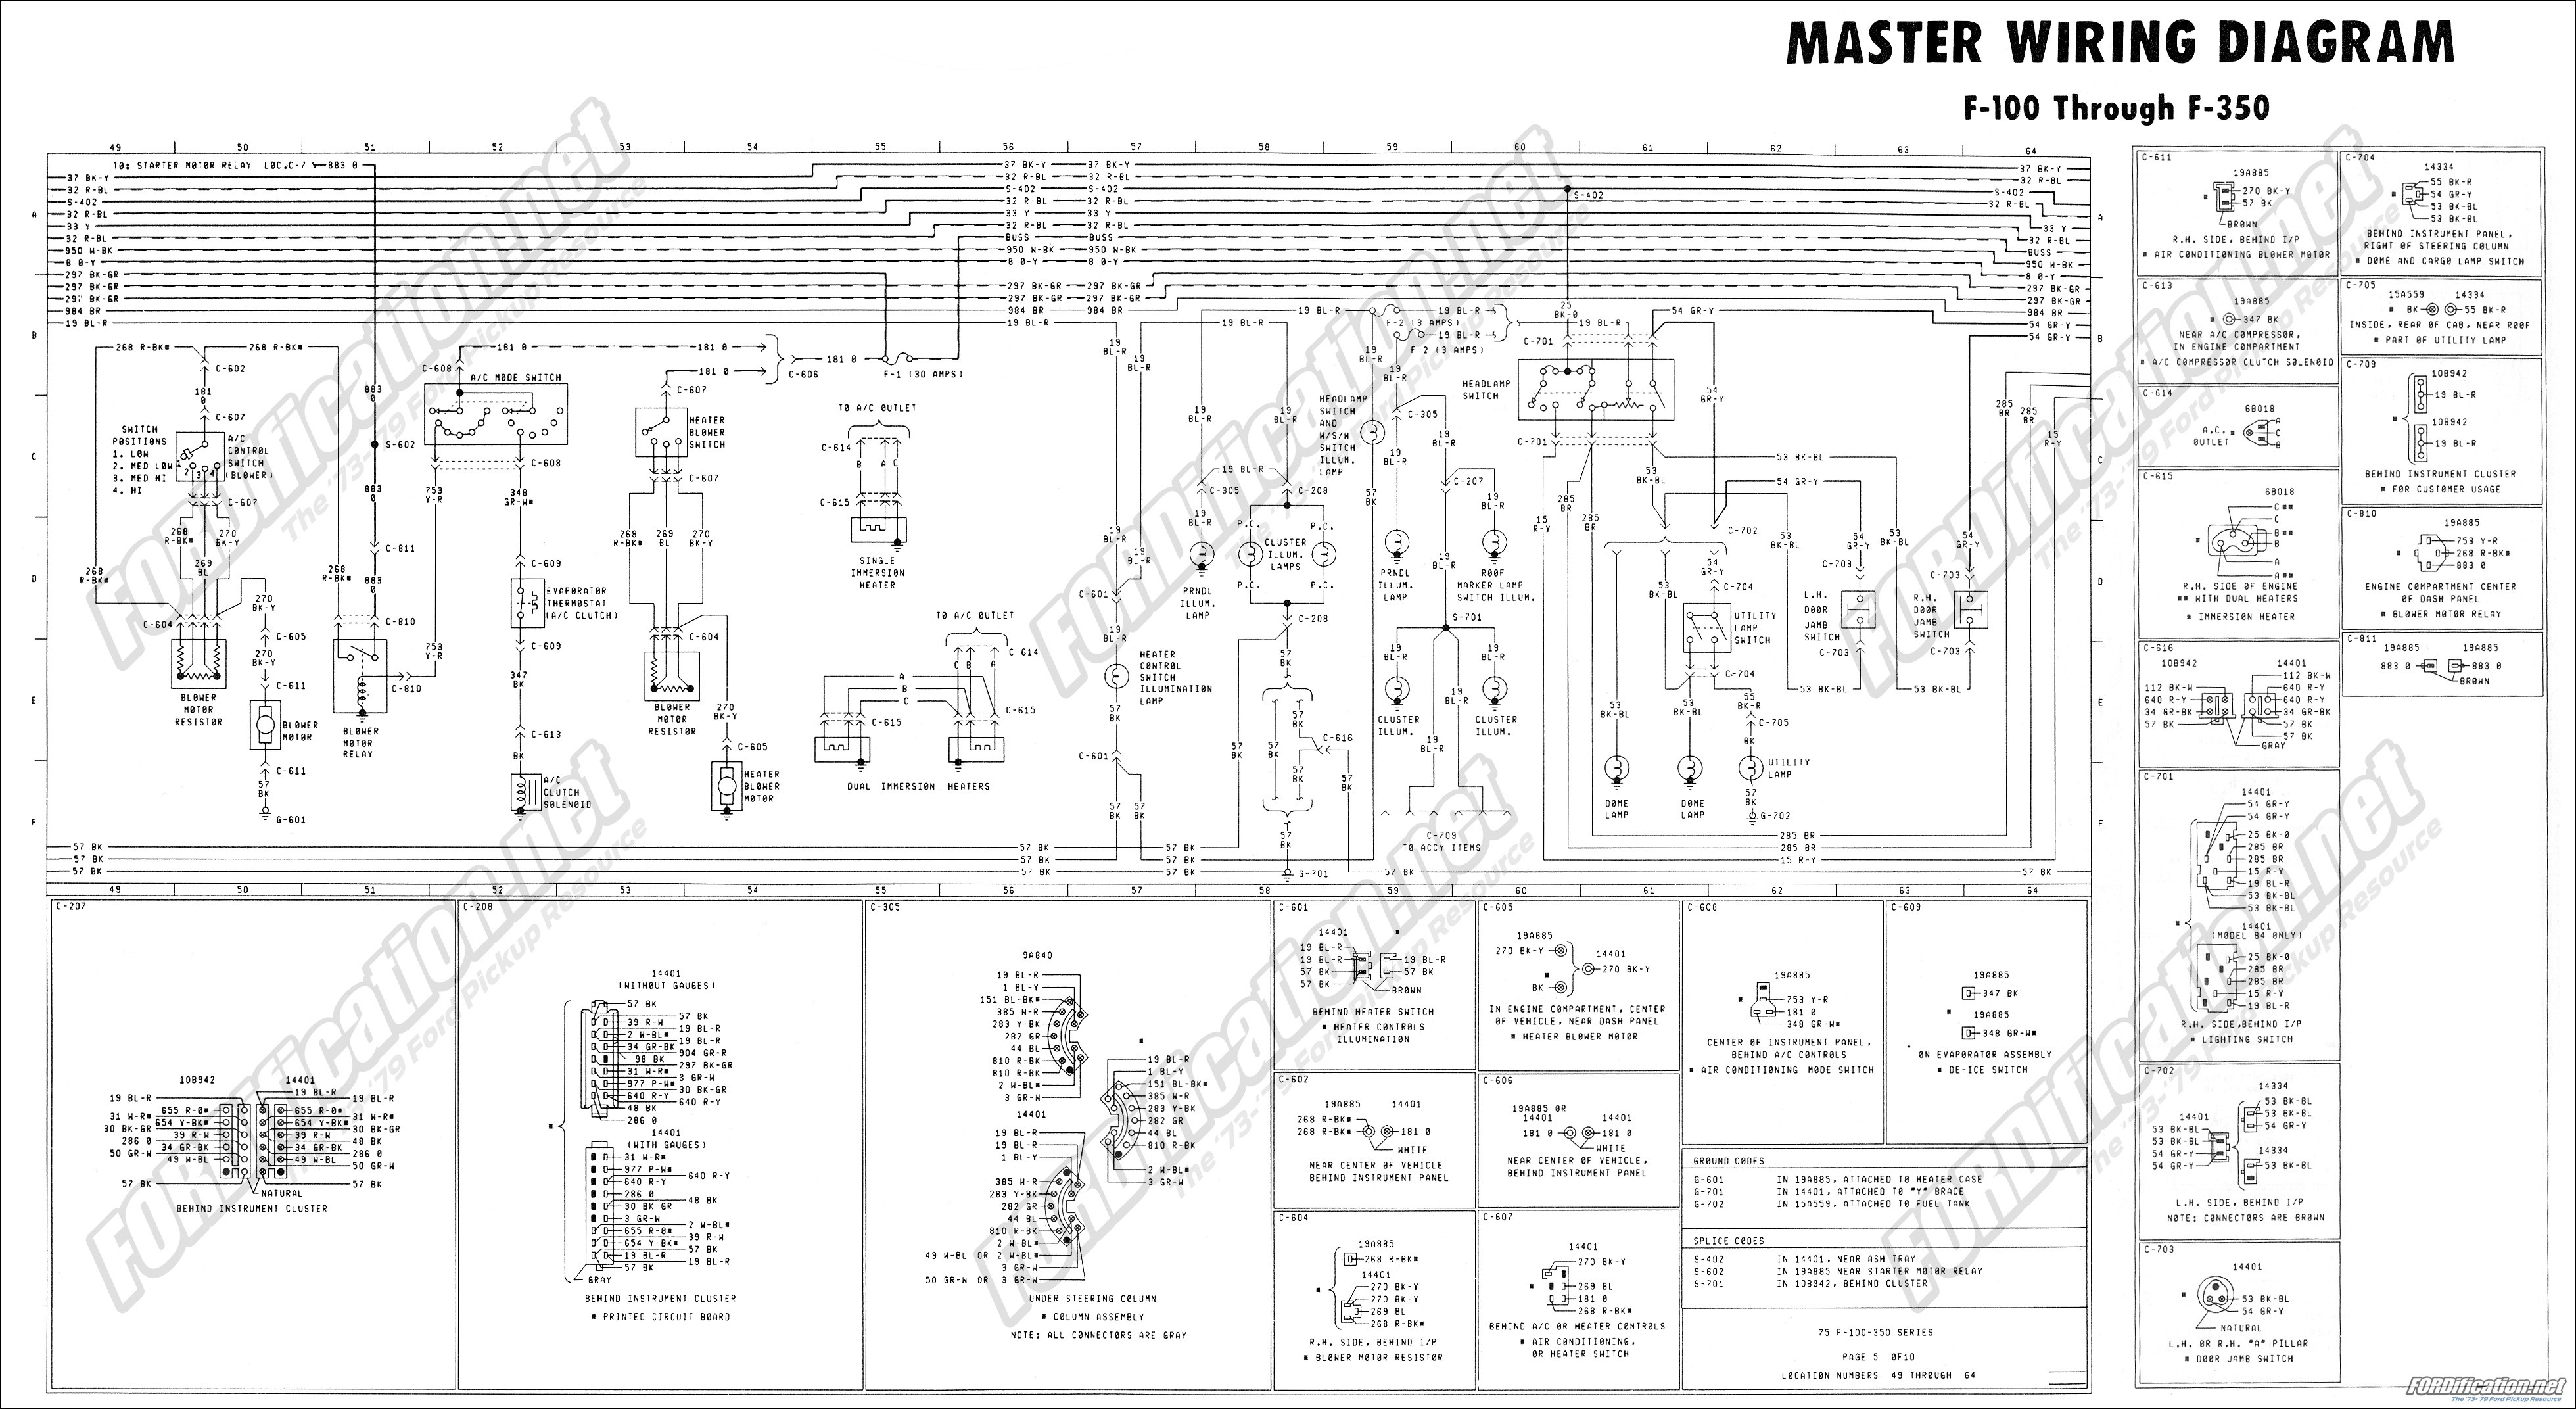 1999 ford F250 Tail Light Wiring Diagram 1973 1979 ford Truck Wiring Diagrams & Schematics Of 1999 ford F250 Tail Light Wiring Diagram